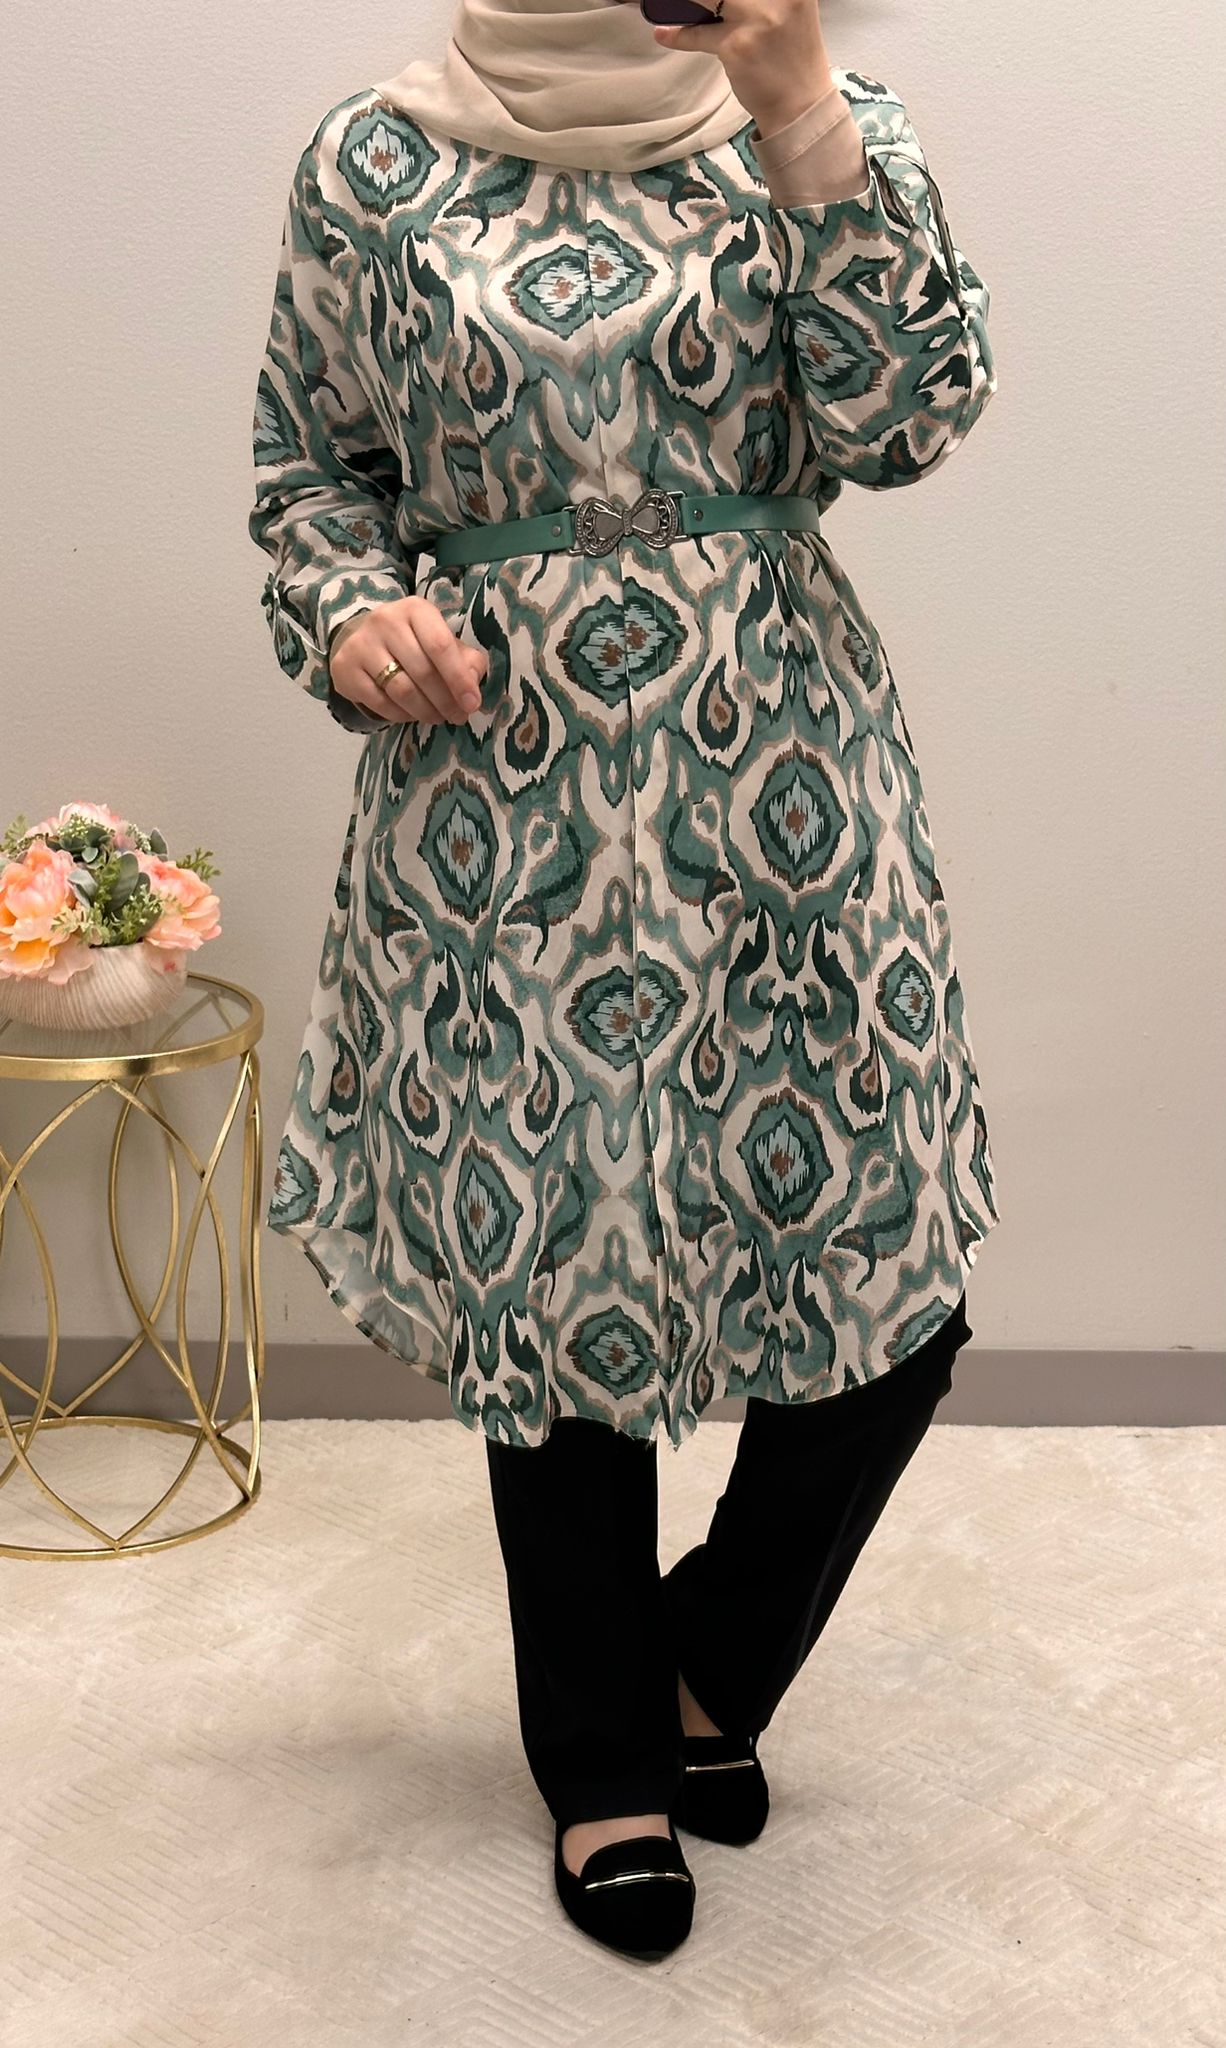 Modest long printed shirt with leather belt